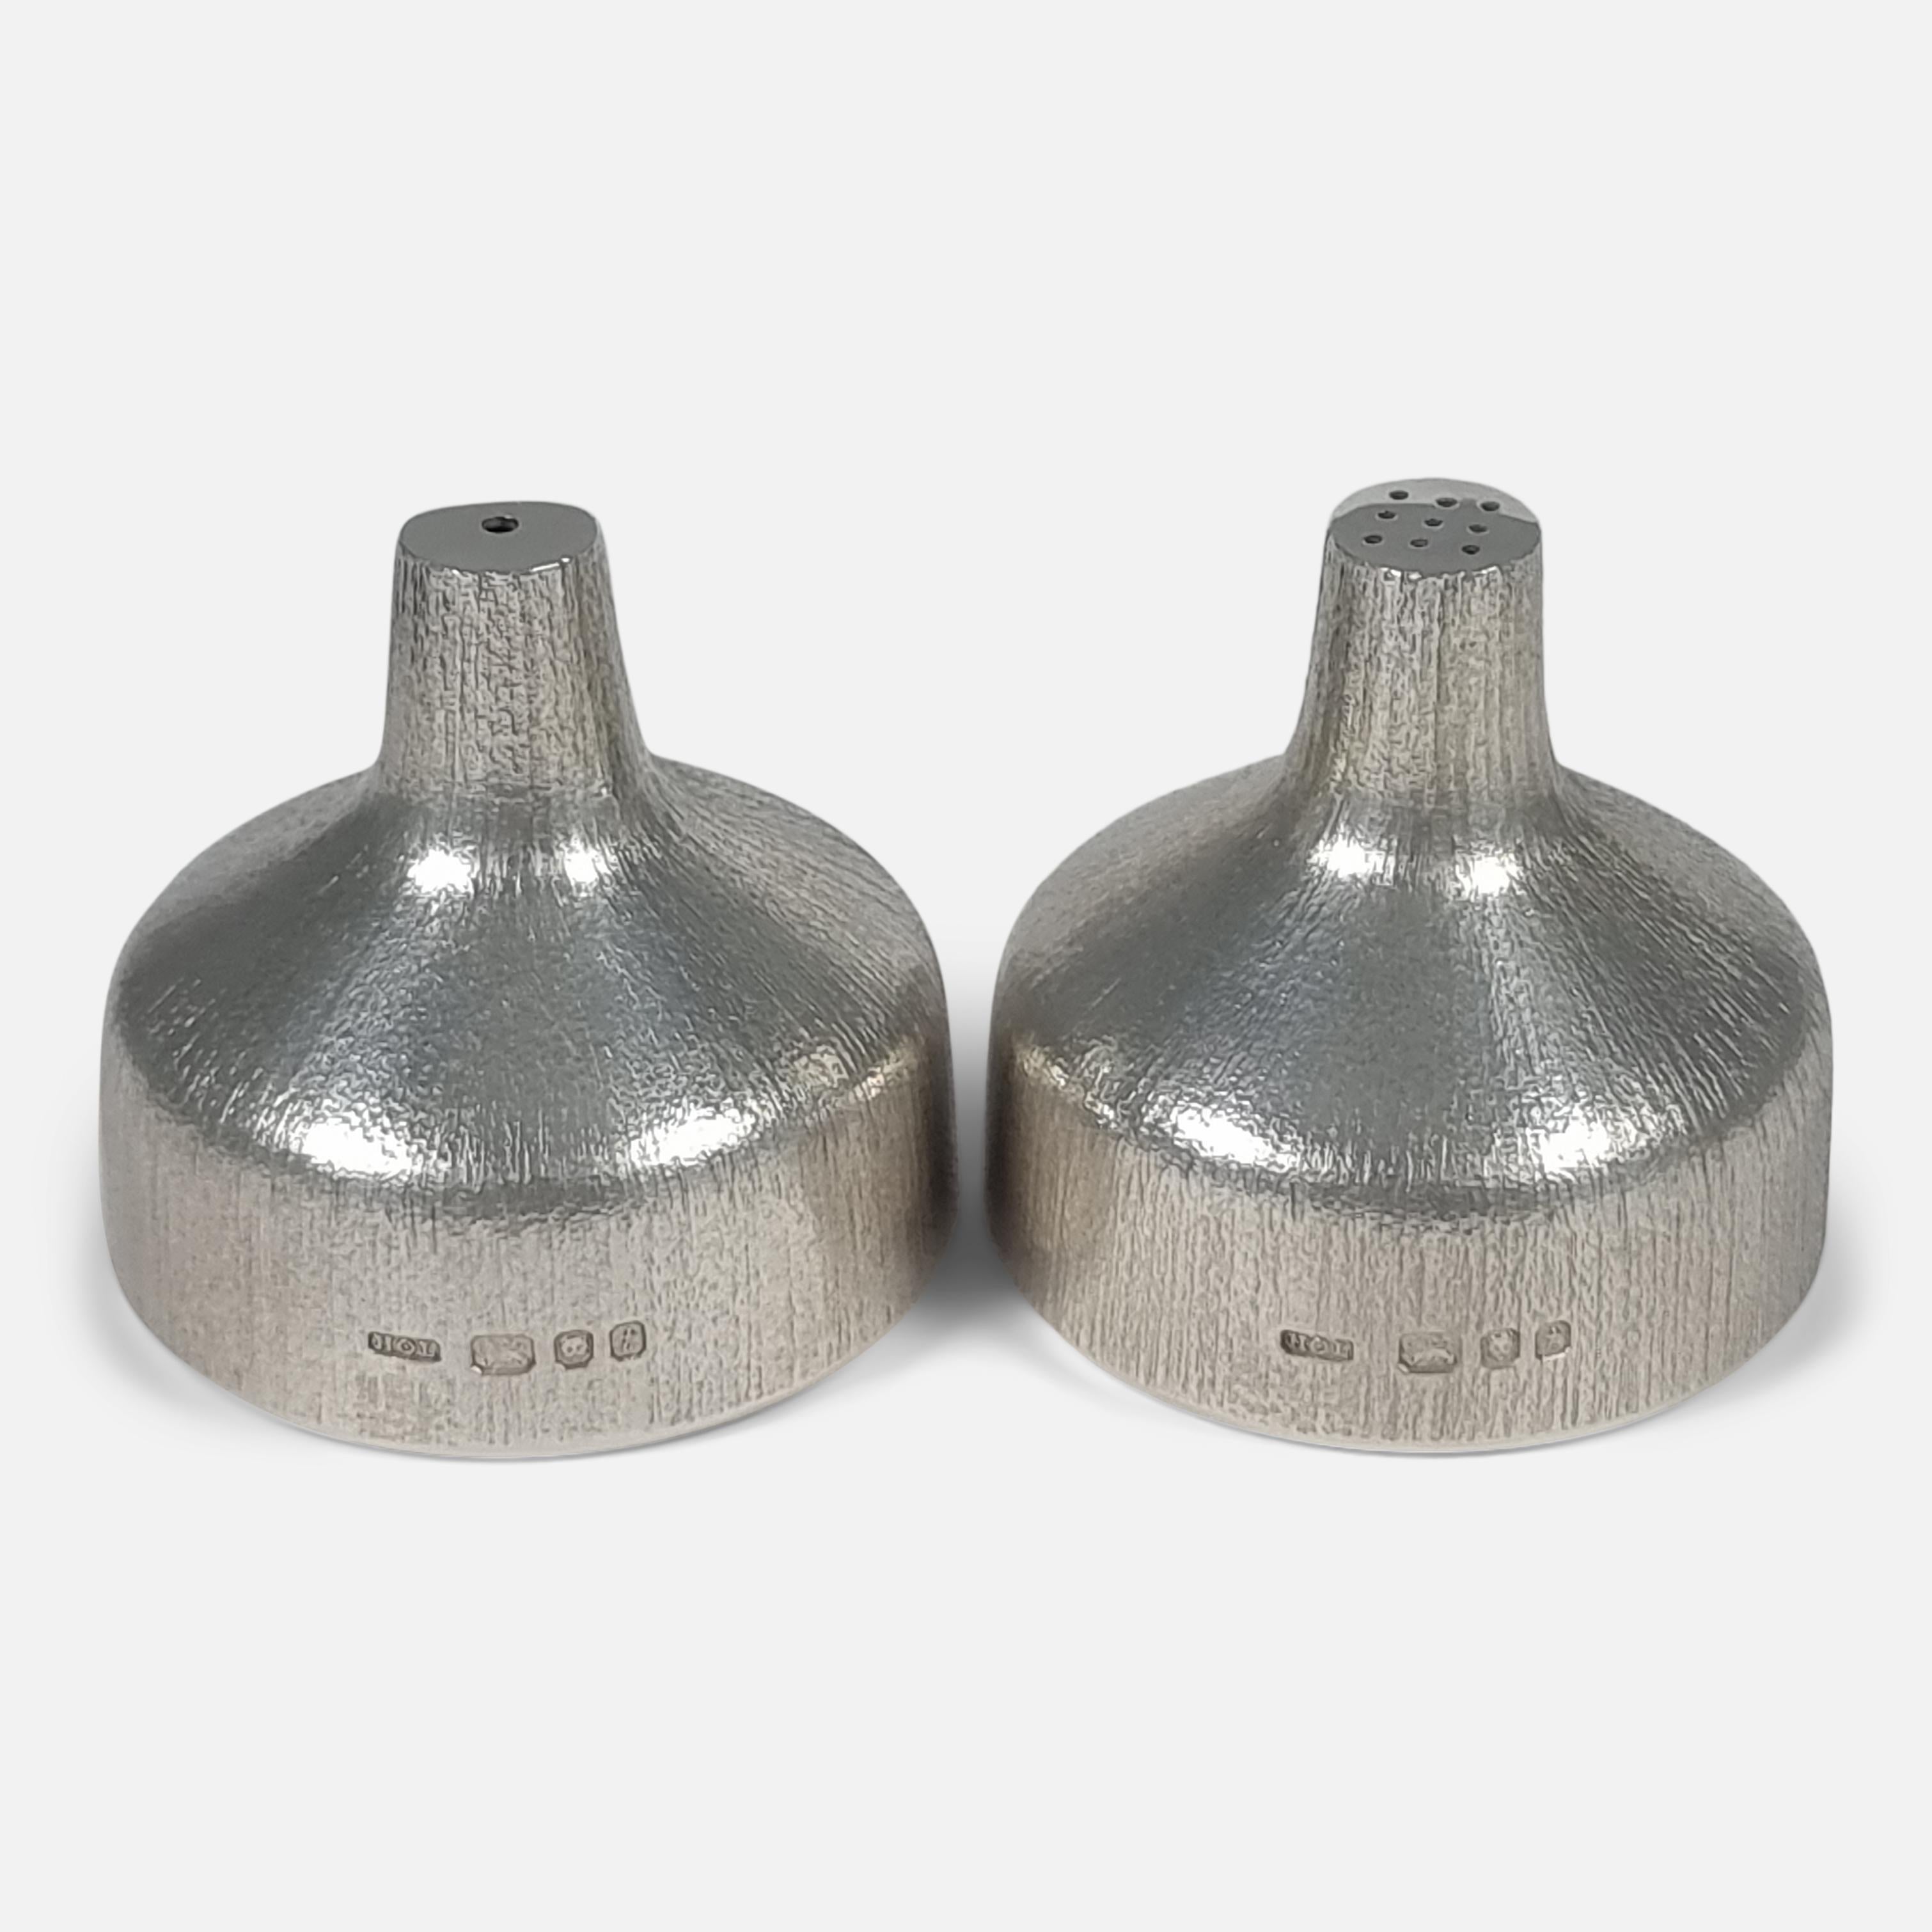 An Elizabeth II silver salt and pepper shaker set by House of Lawrian. The salt and pepper shakers are of squat tapering round form, with bark-effect decoration.

Assay: - .925 (Sterling Silver).

Period: - Late 20th Century.

Date: - 1974.

Maker: